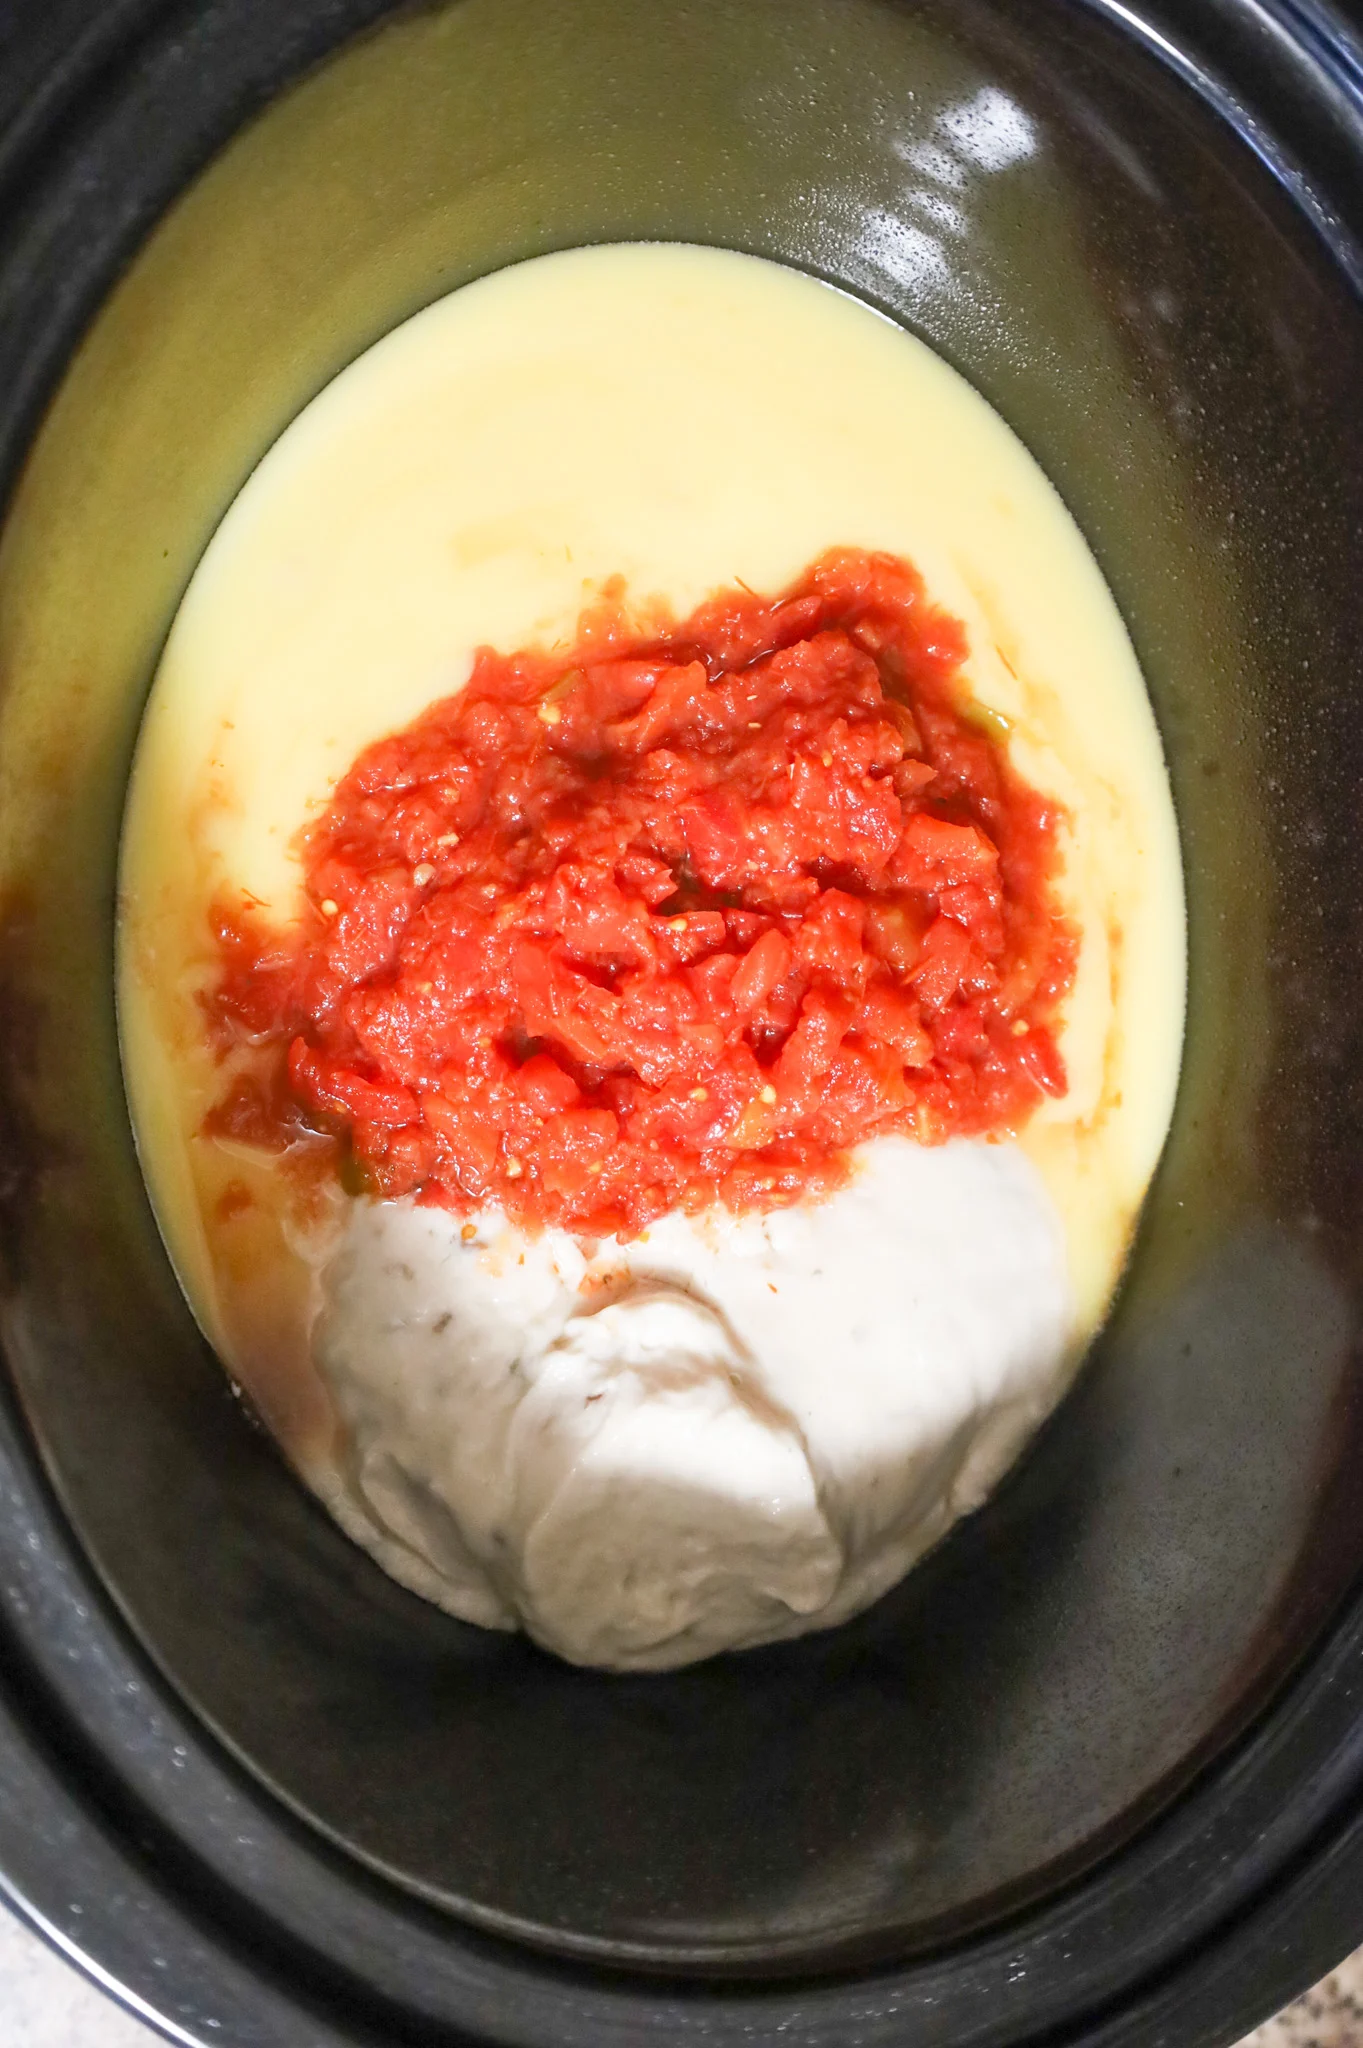 rotel diced tomatoes on top of cream soups in a crock pot